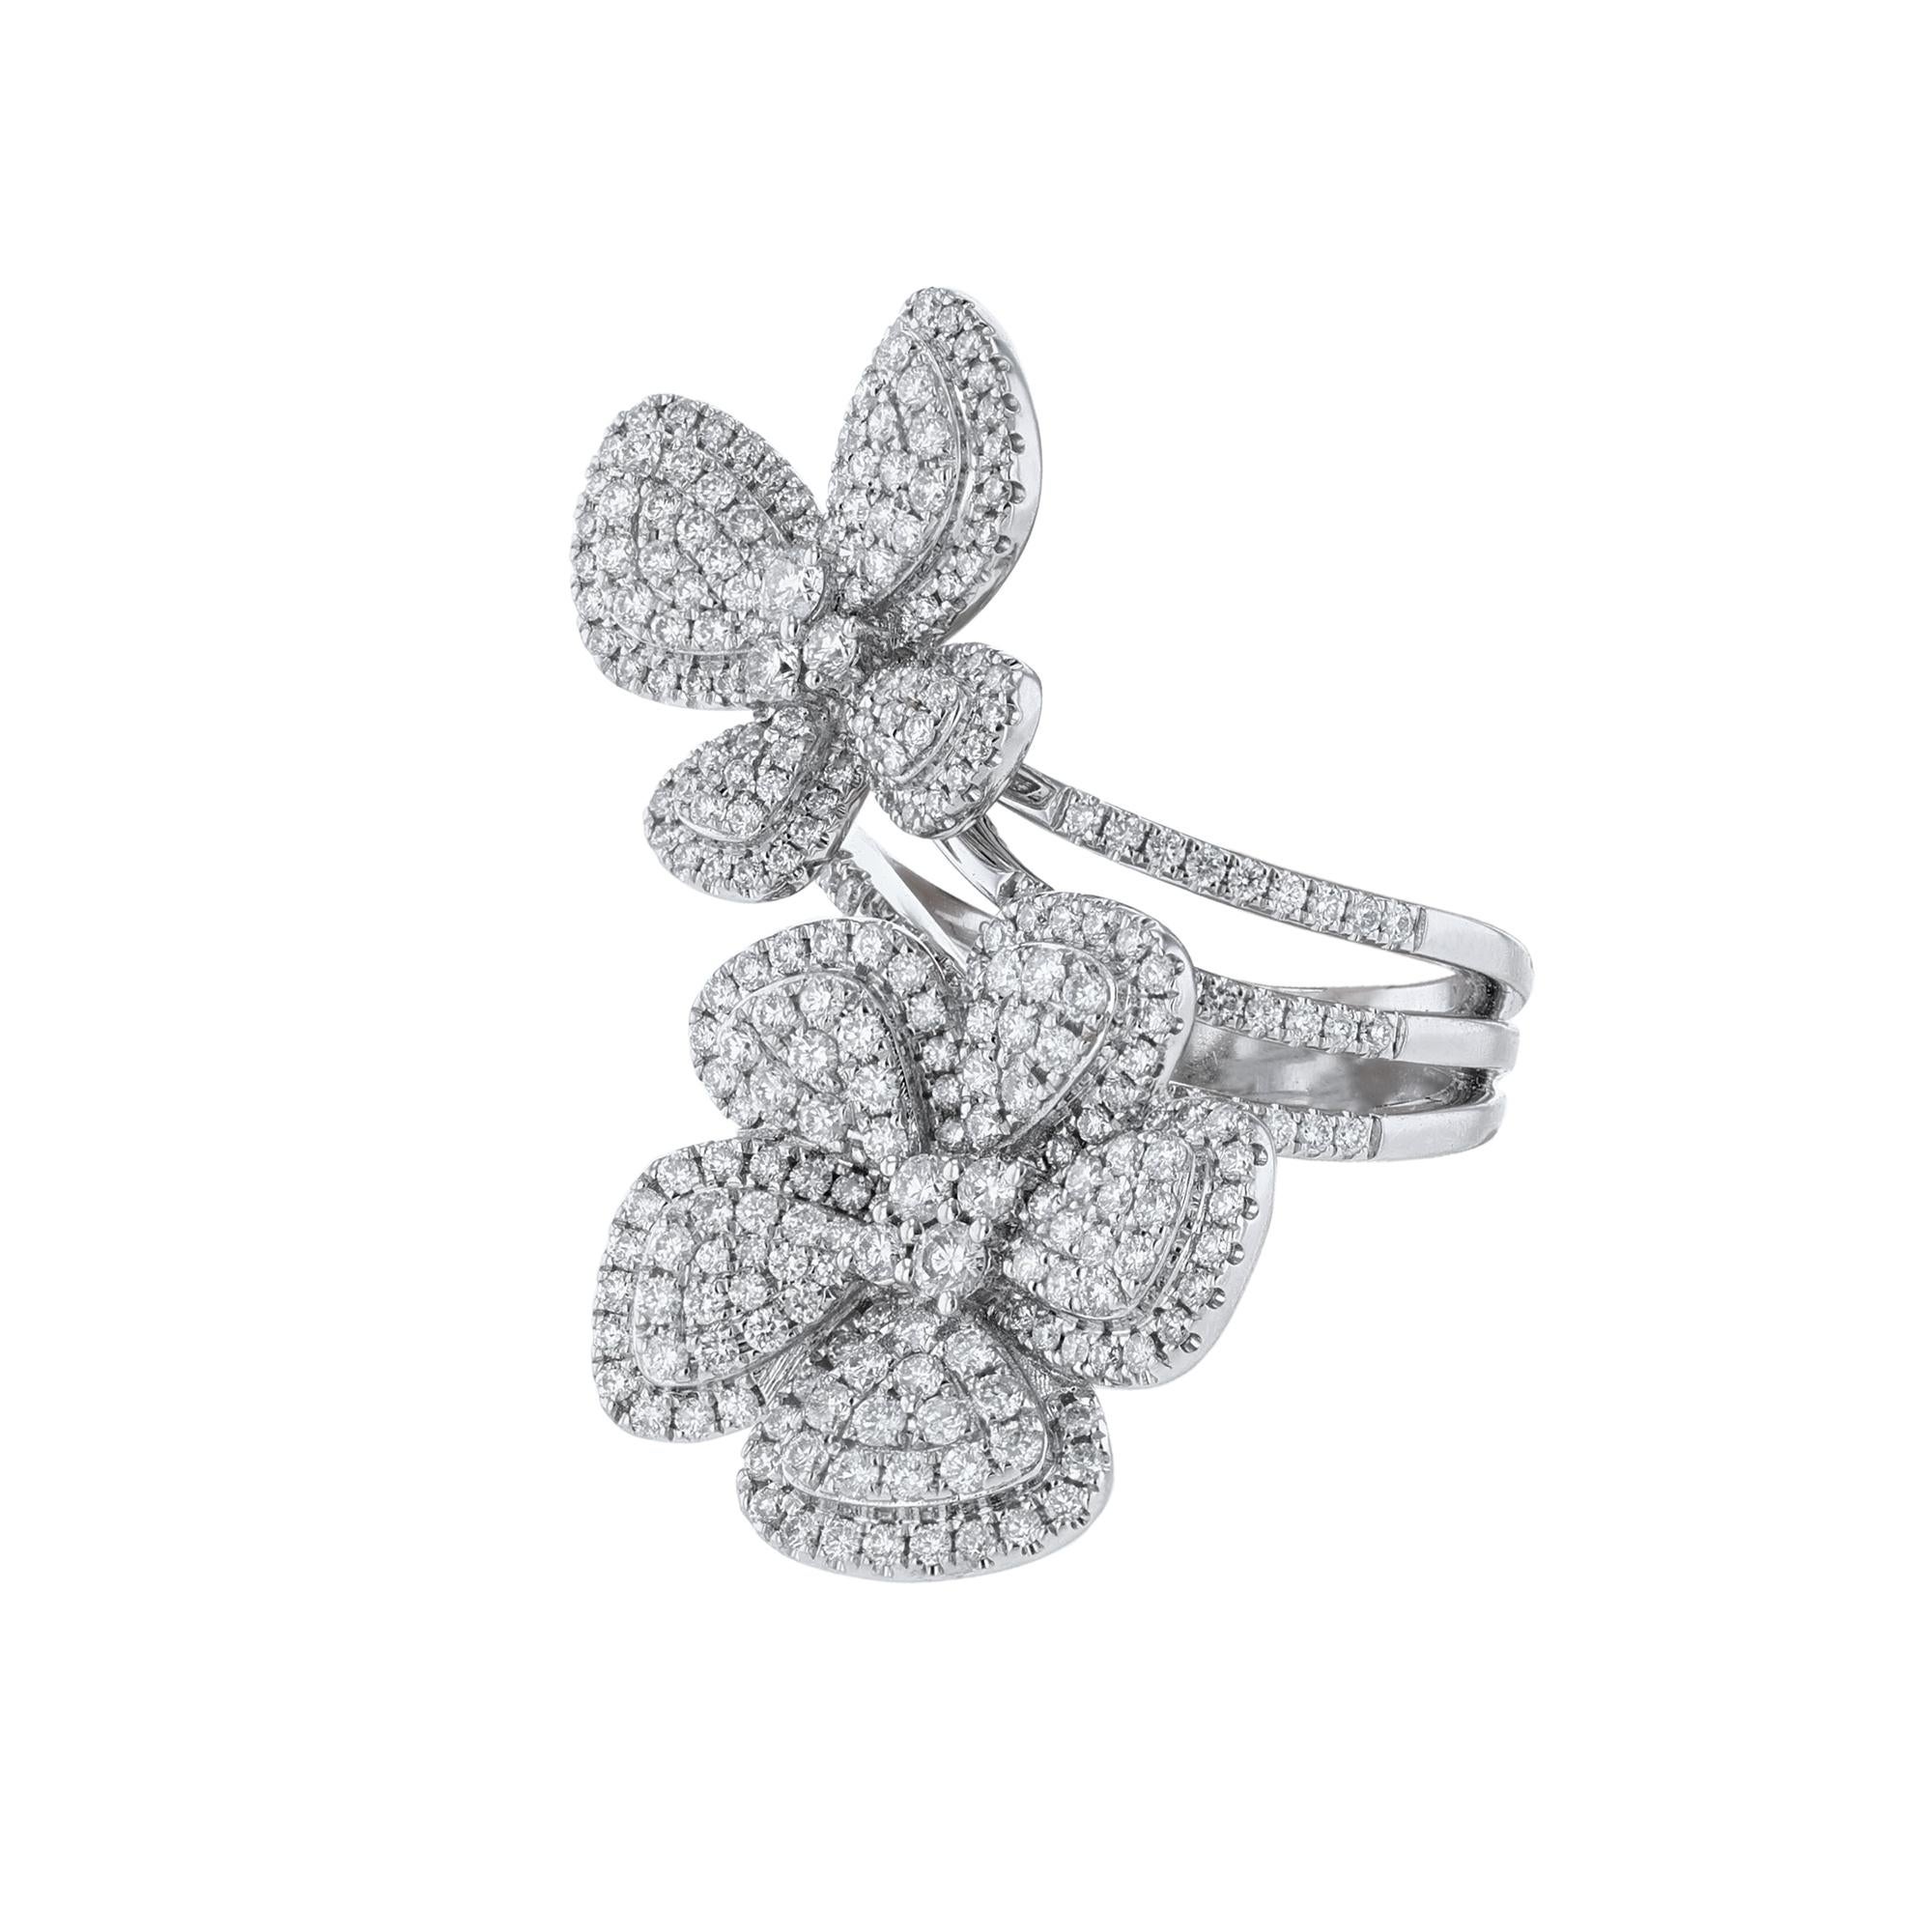 This ring is made in 18K white gold and features a flower and a butterfly. Made out of 305 round cut diamonds weighing 1.85 carats. With a color grade (I) and clarity grade (SI2). All stones are prong set.
